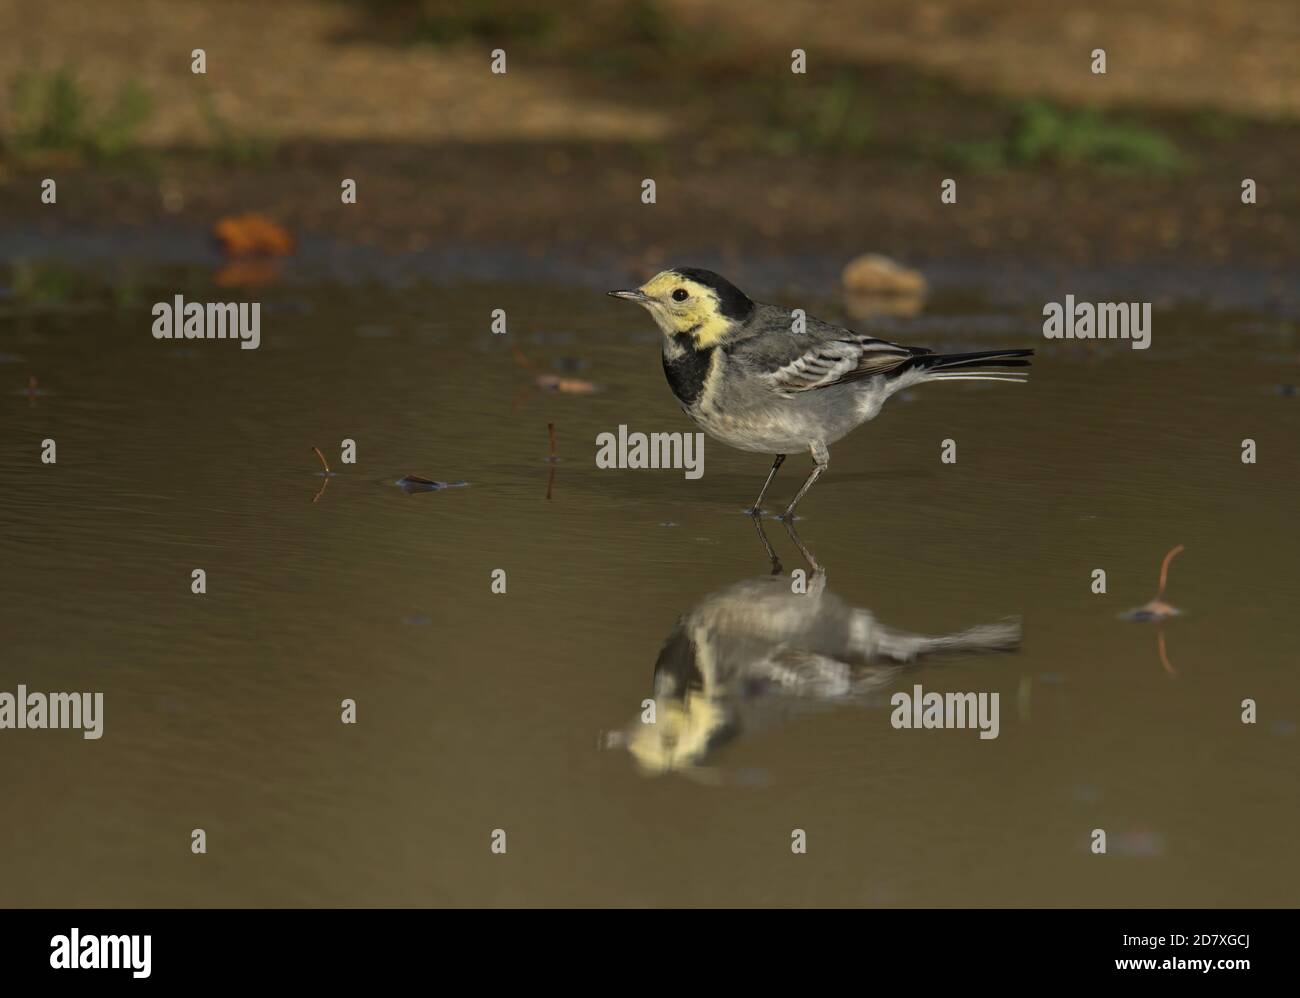 Pied Wagtail Motacilla alba  juvenile chasing insects in a puddle and showing its reflectio0n. Stock Photo